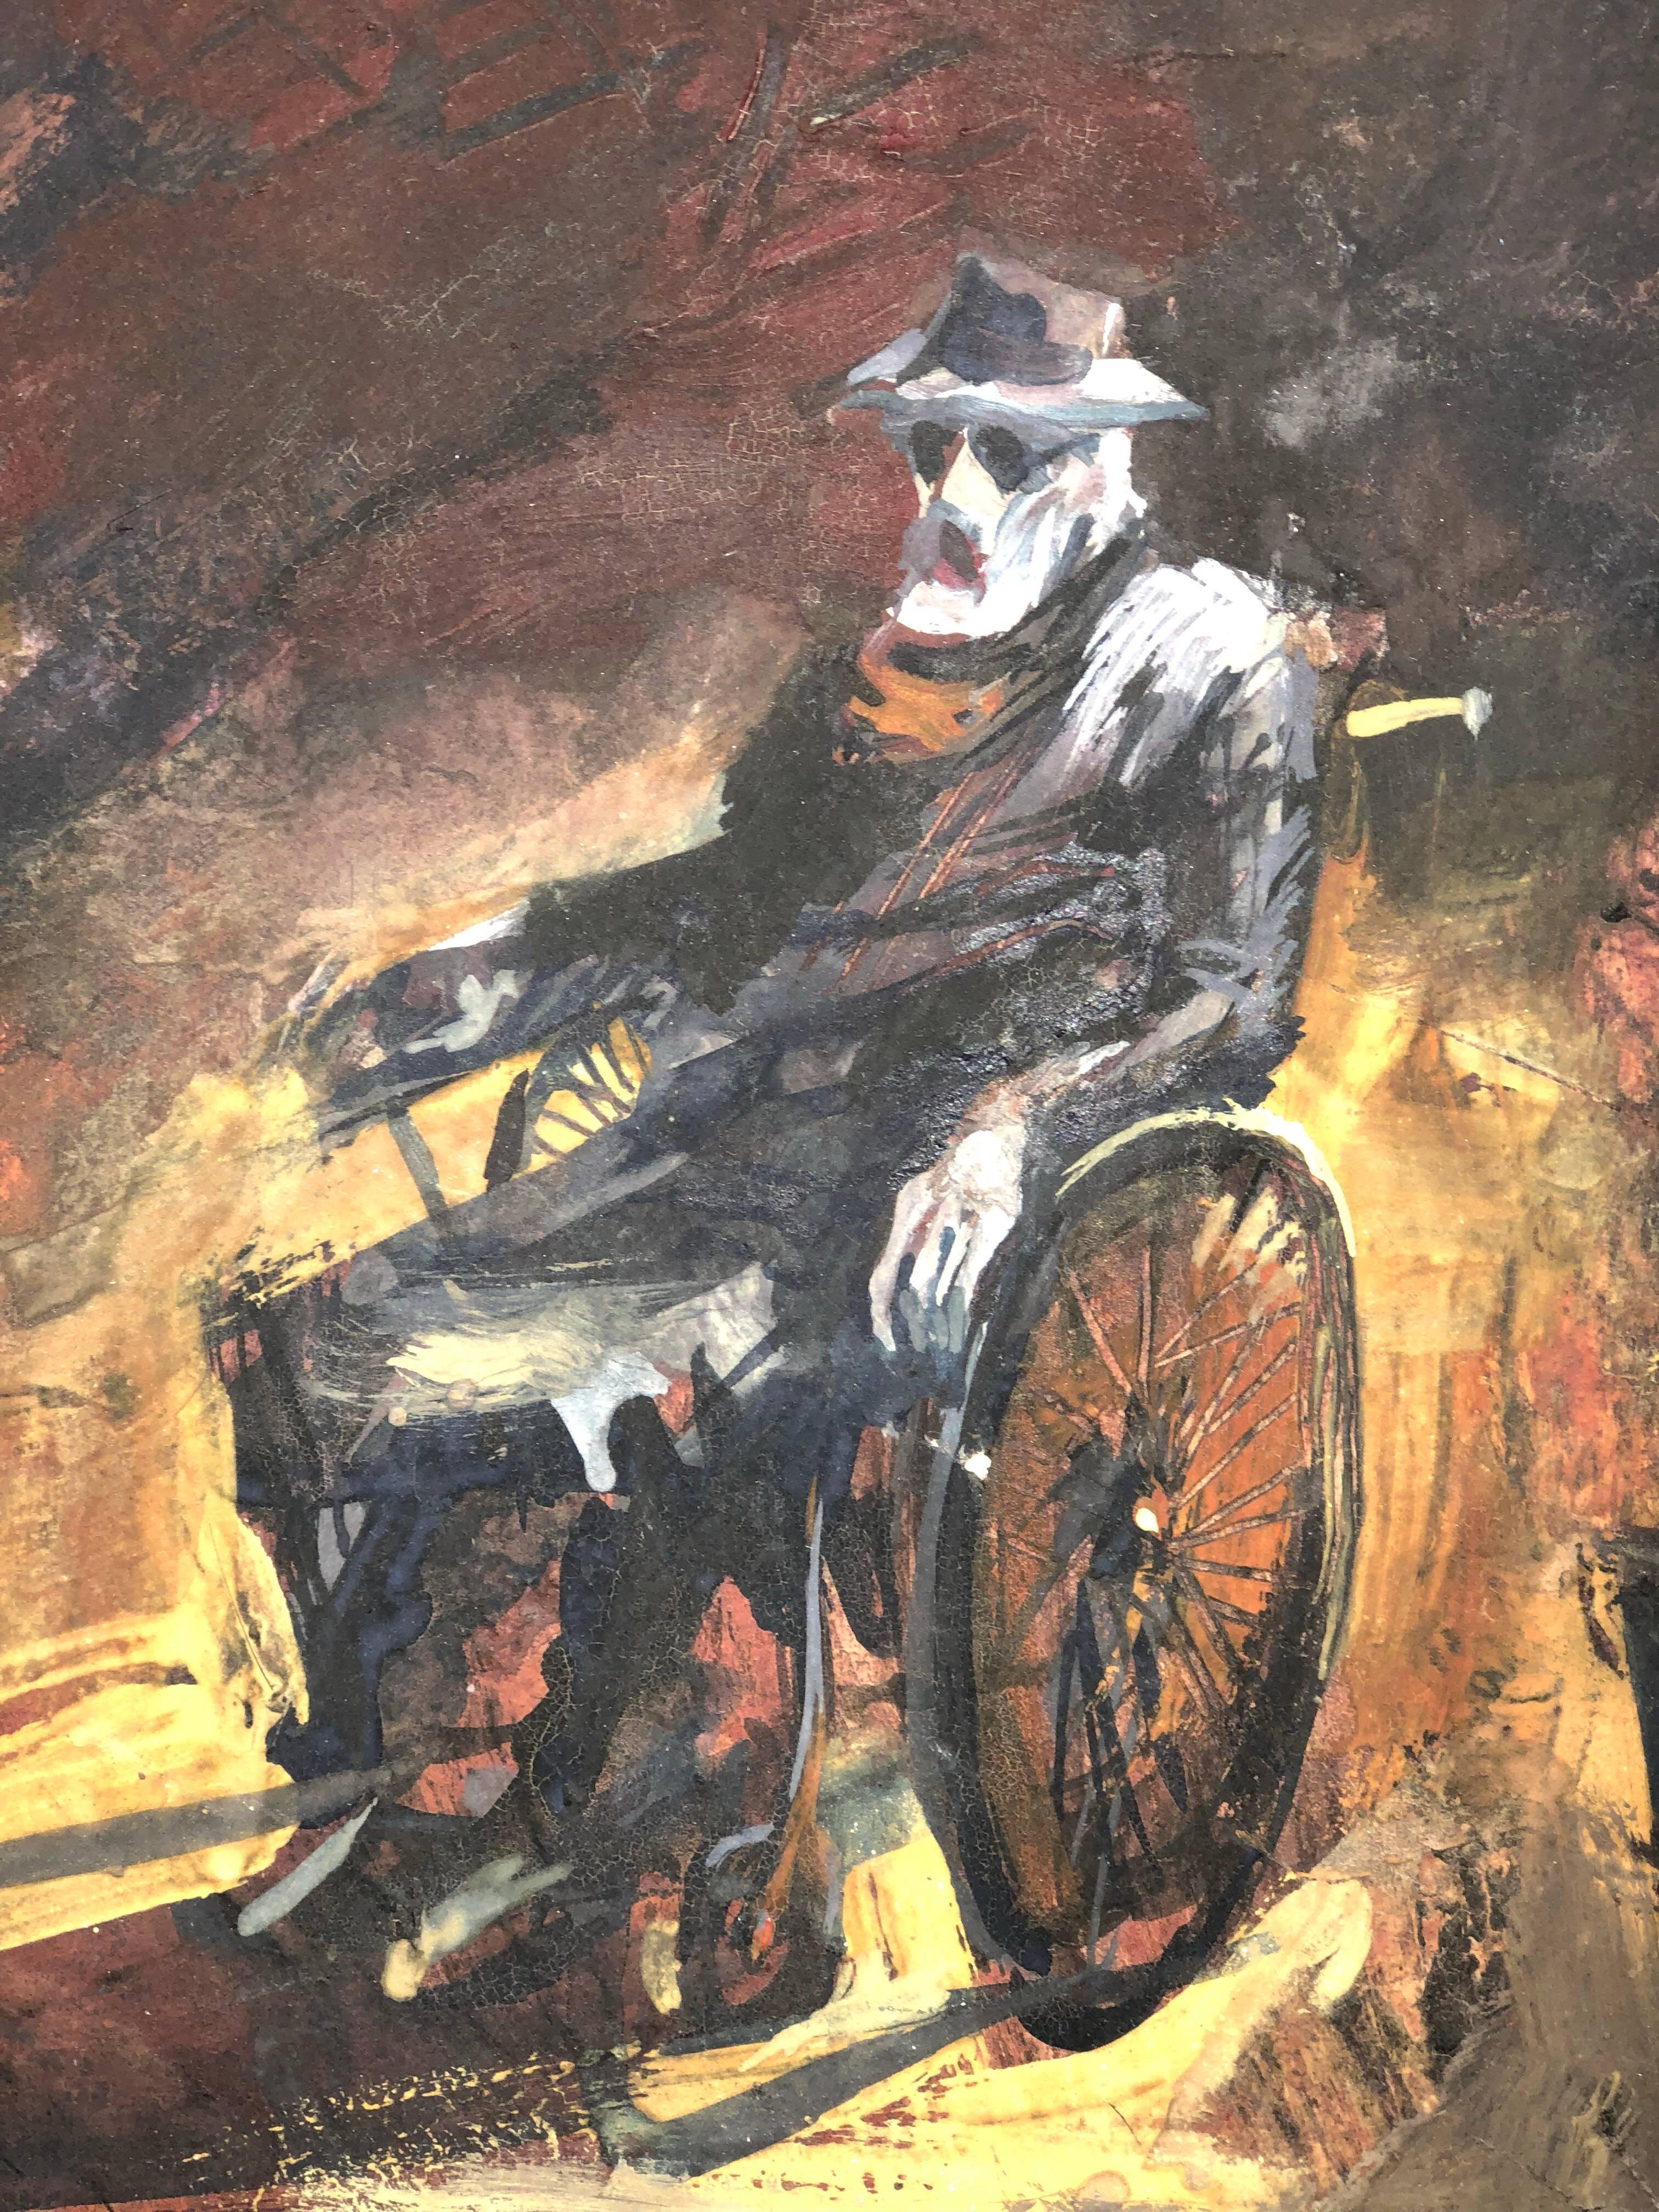 This is for a French Avant garde theatre stage design. it depicts a man in sunglasses , coat and scarf in a wheelchair. (Eugene Ionesco)
Grégoire Michonze (1902–1982) (variant name Grégoire Michonznic, Romanian: Григо́рий Мишо́нзник Grogórij